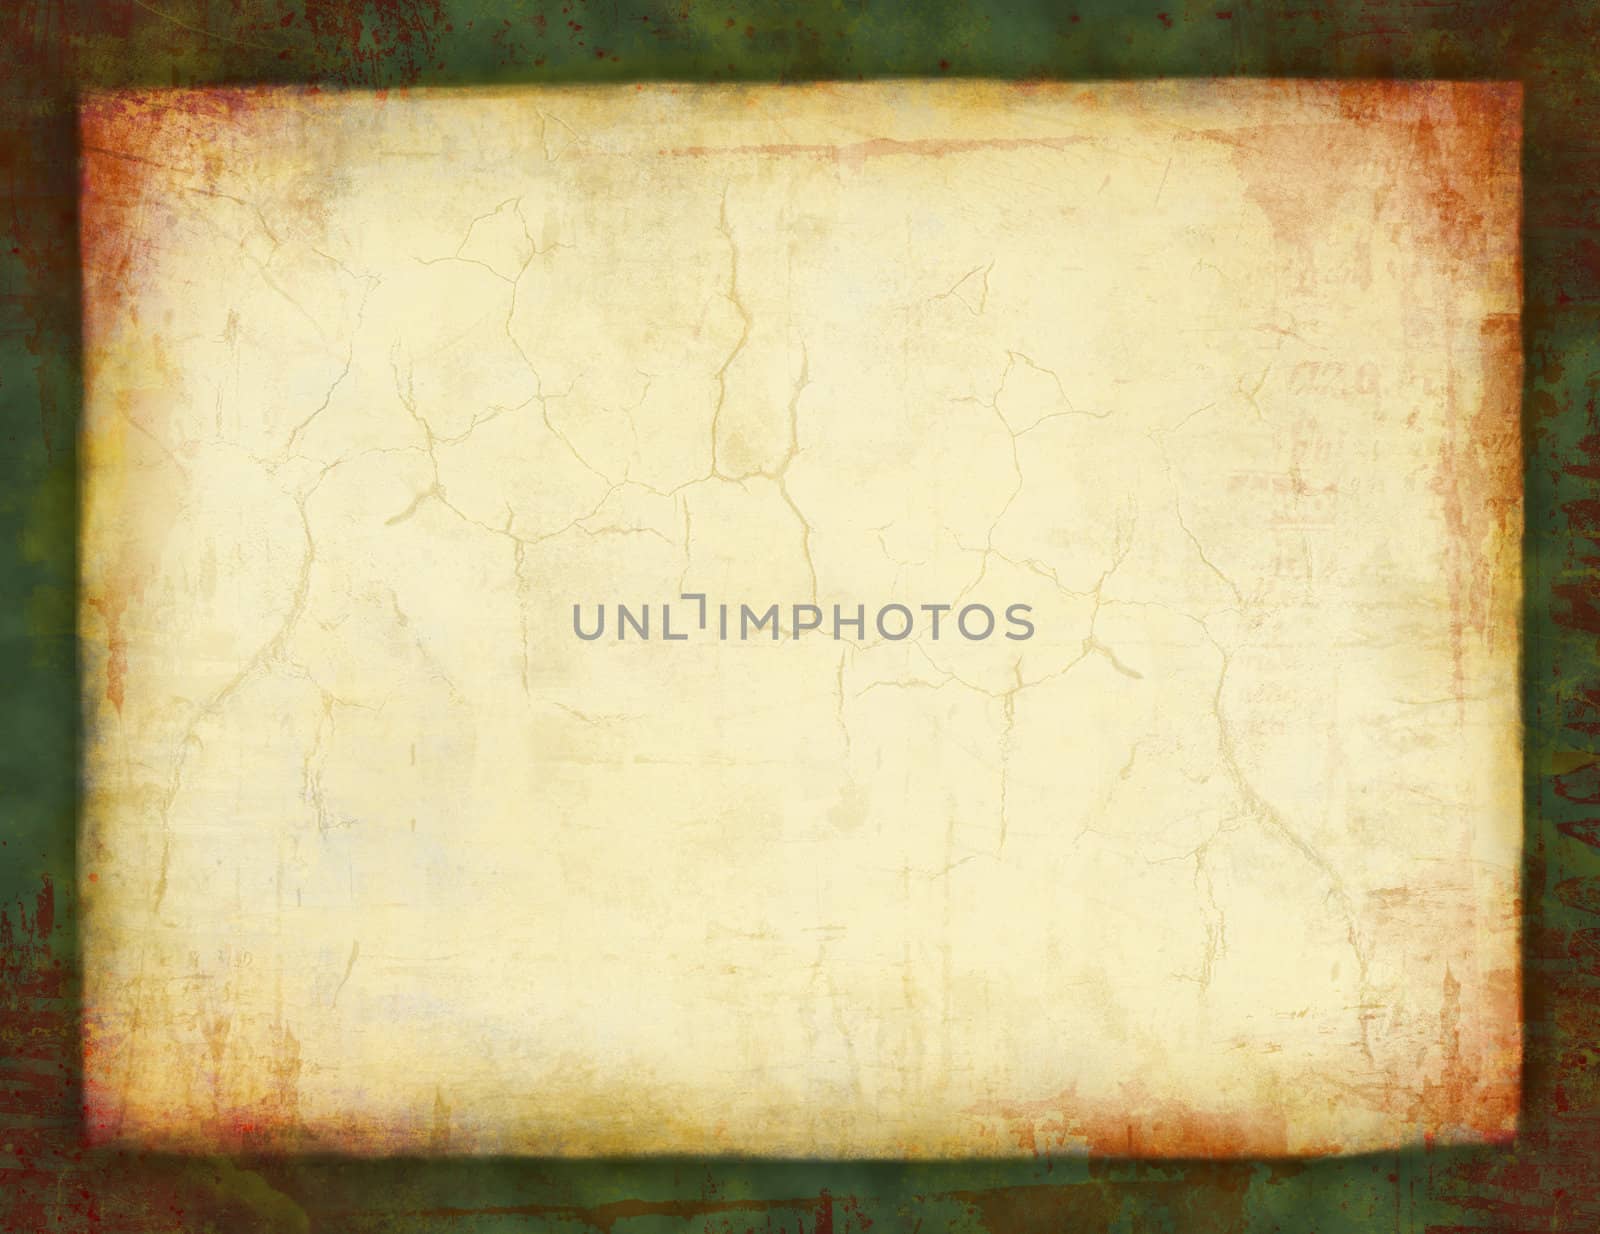 Computer designed highly detailed grunge border and aged textured background with space for your text or image. Nice grunge layer for your projects.